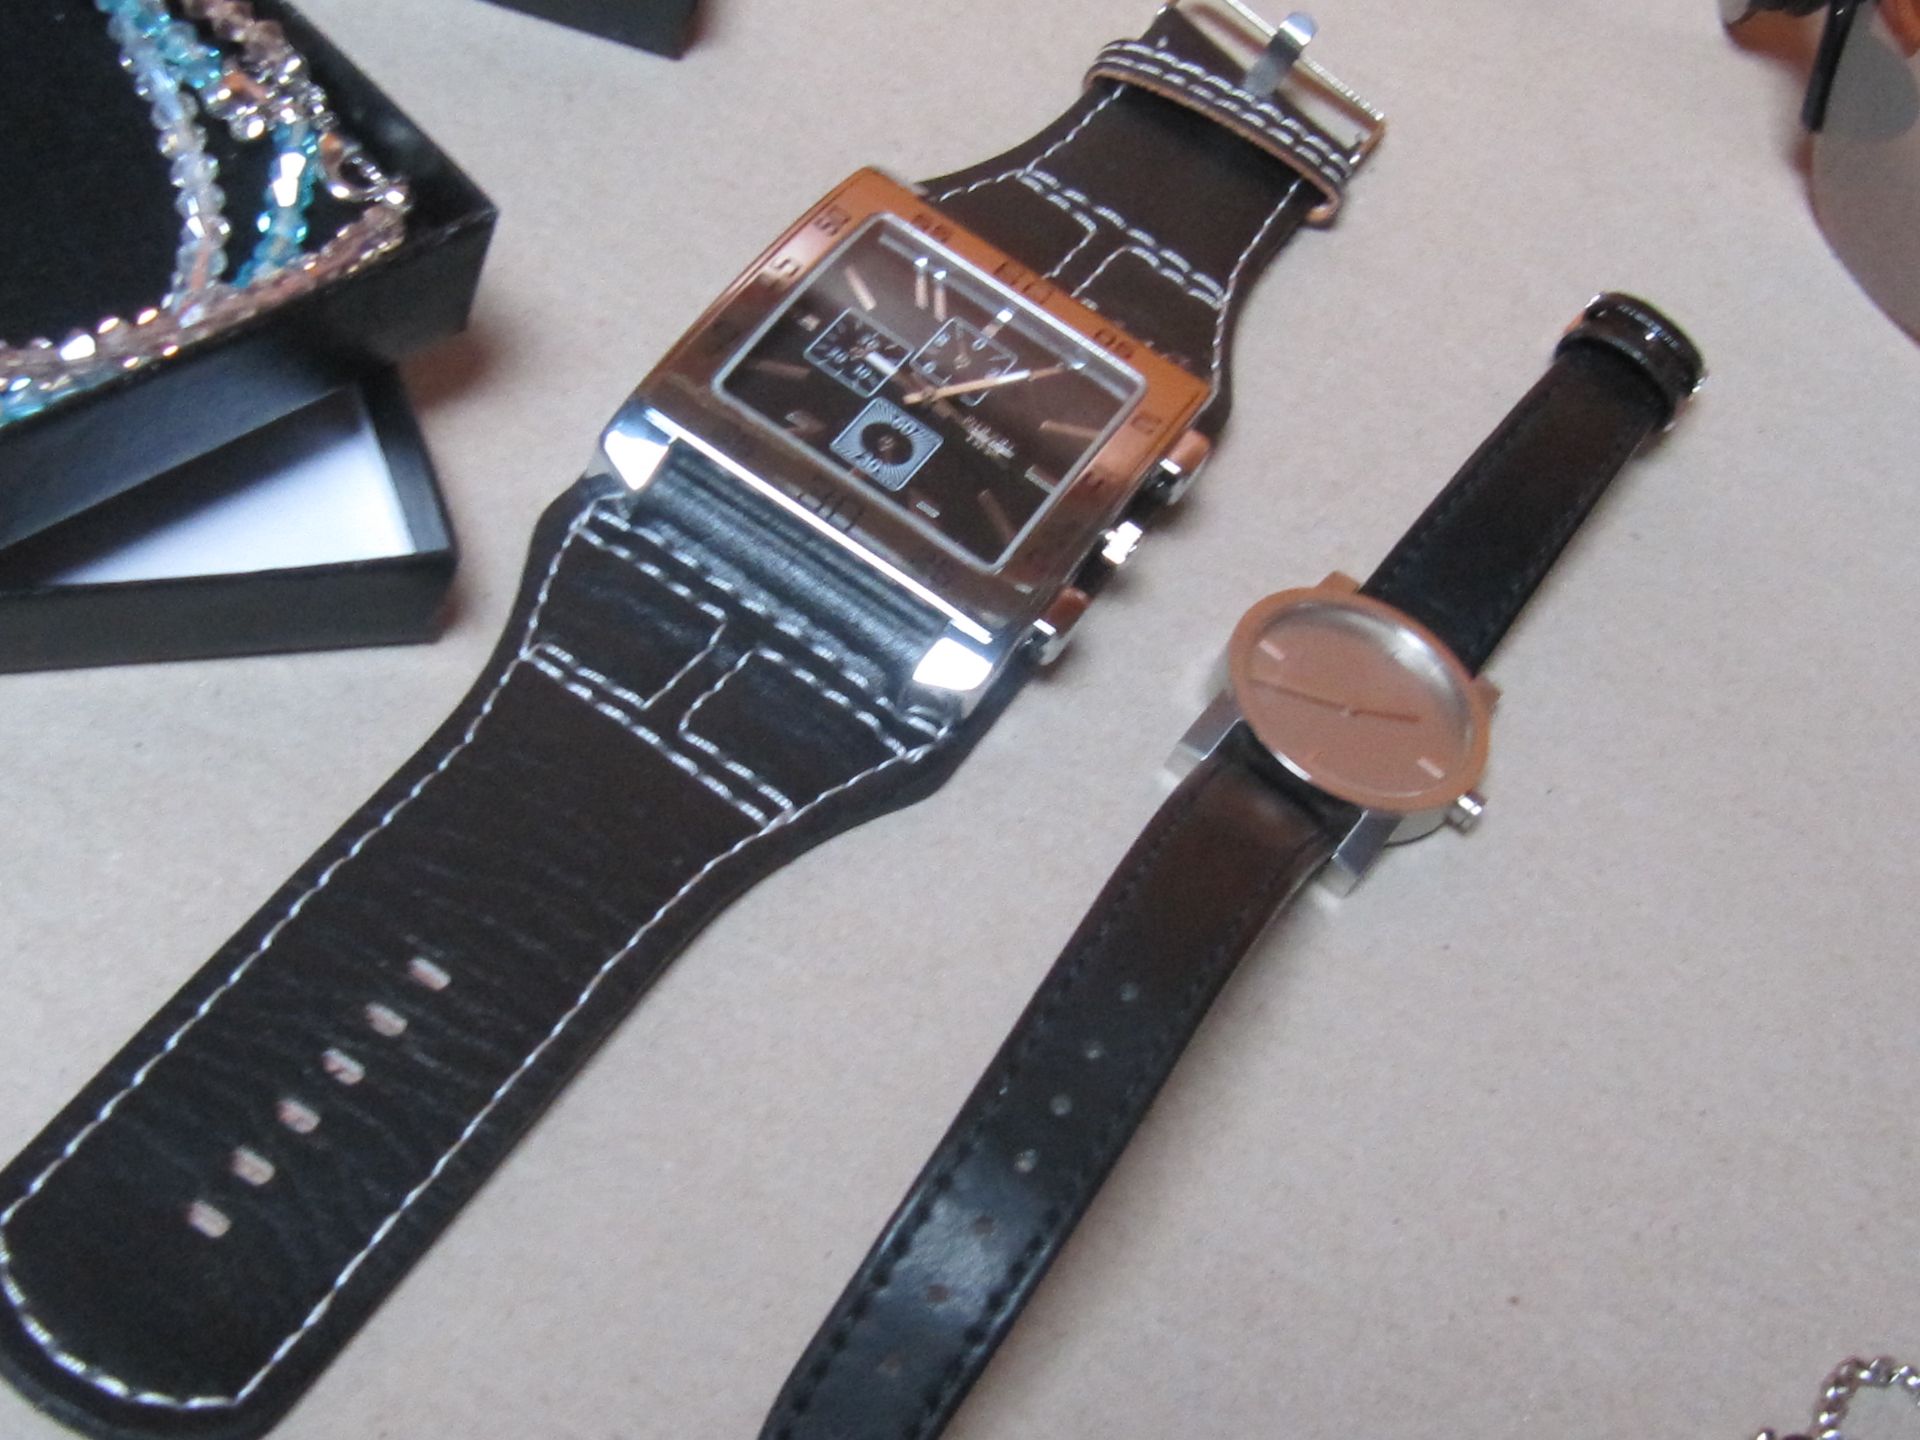 29 items inc. CK Watch, Deisel Watch and Costume Jewellery. - Image 12 of 23